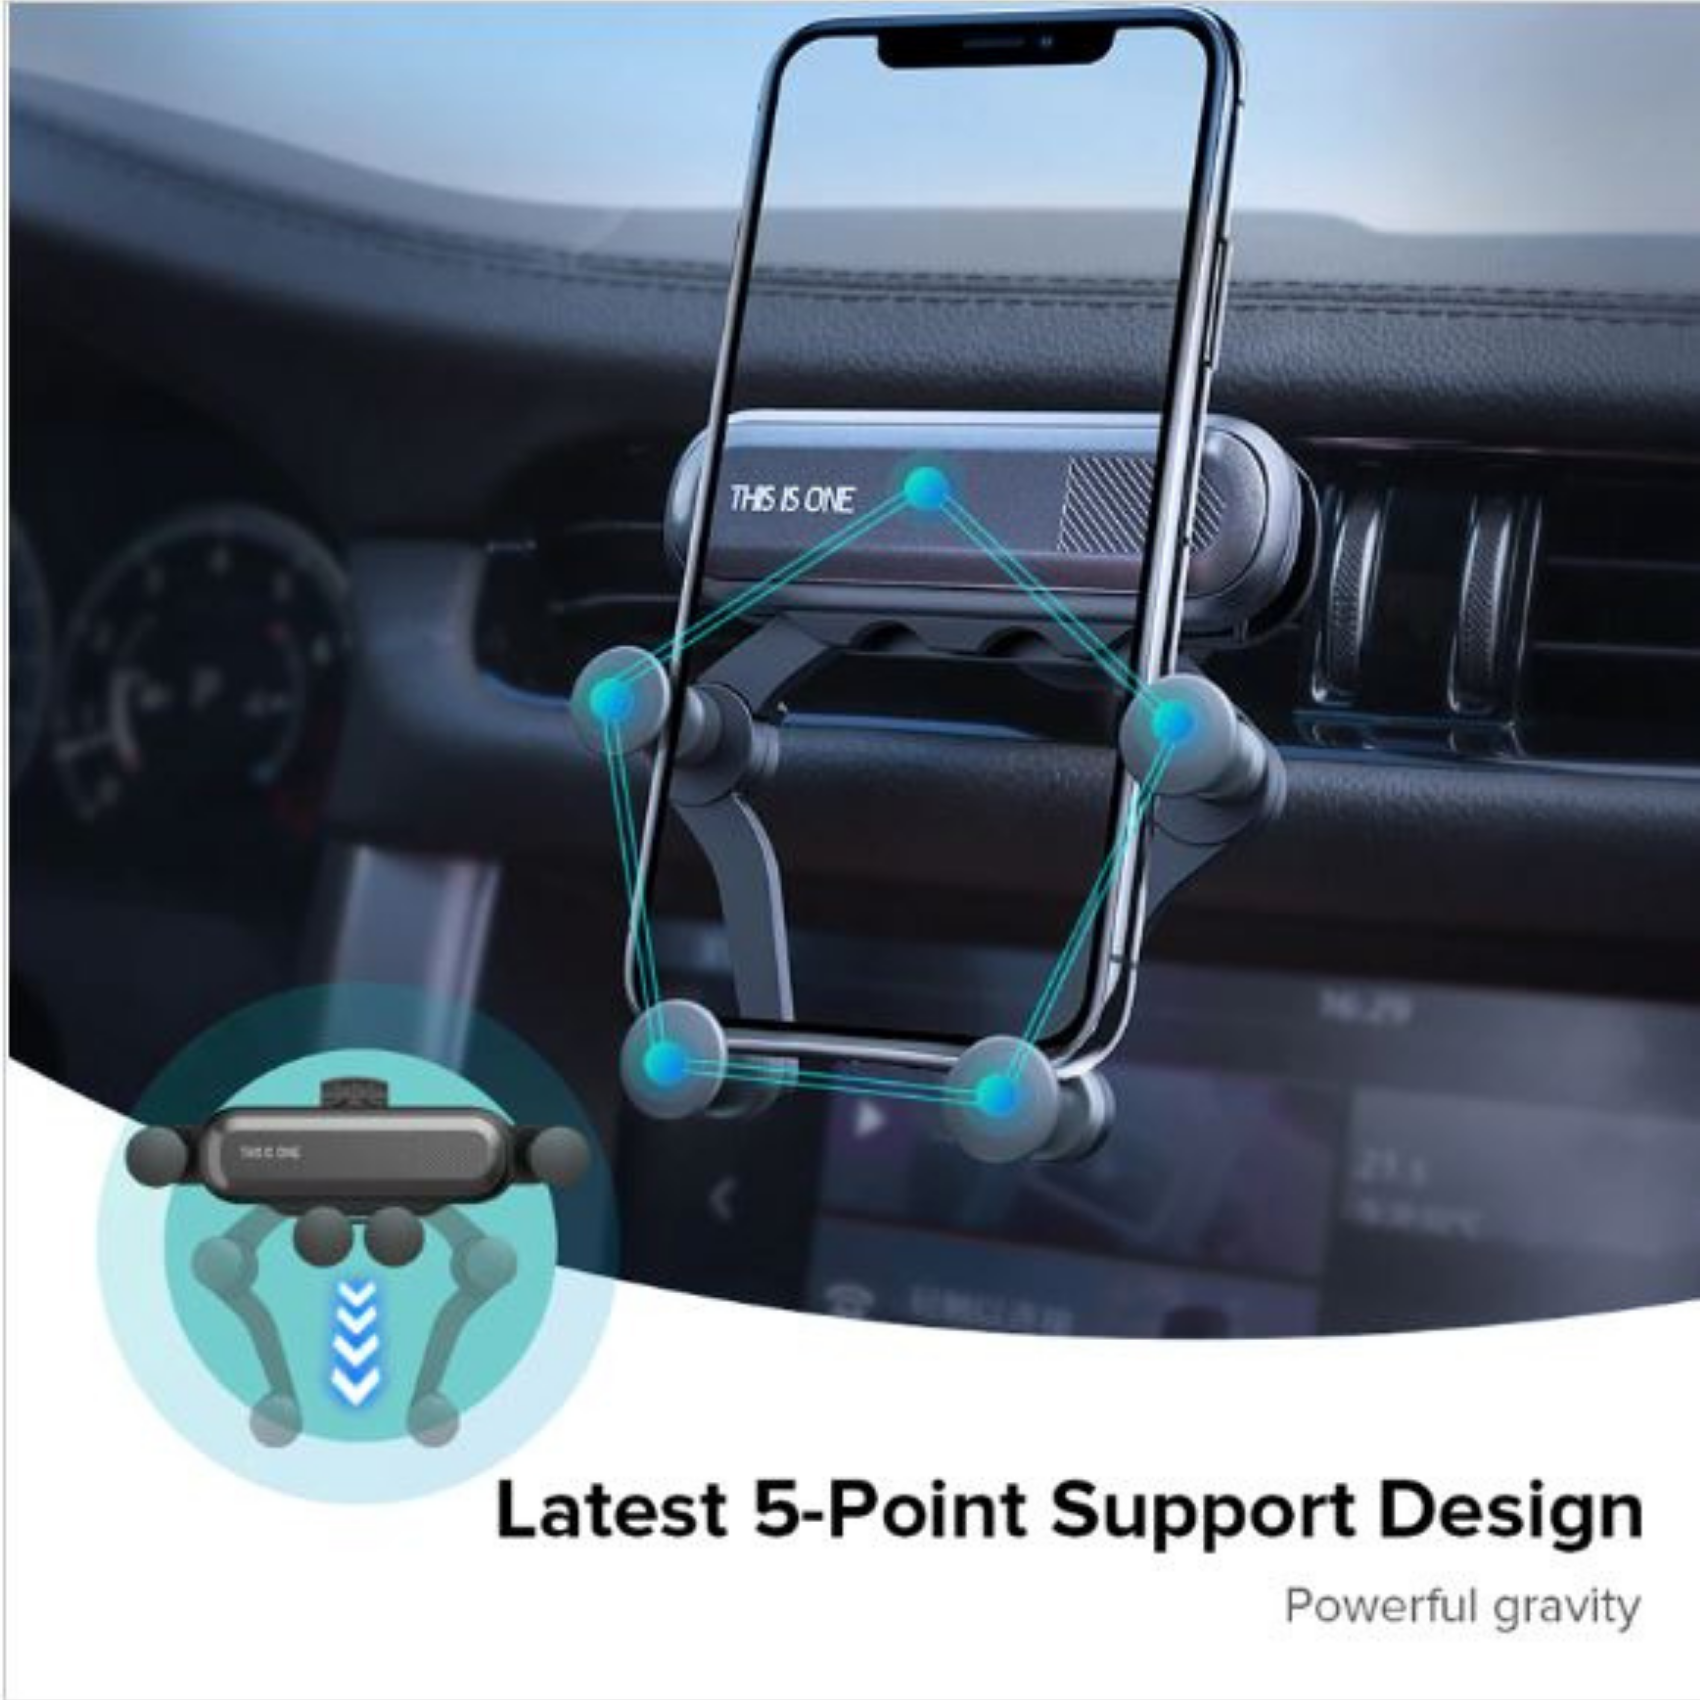 Gravity Car Phone Holder - Universal mobile support